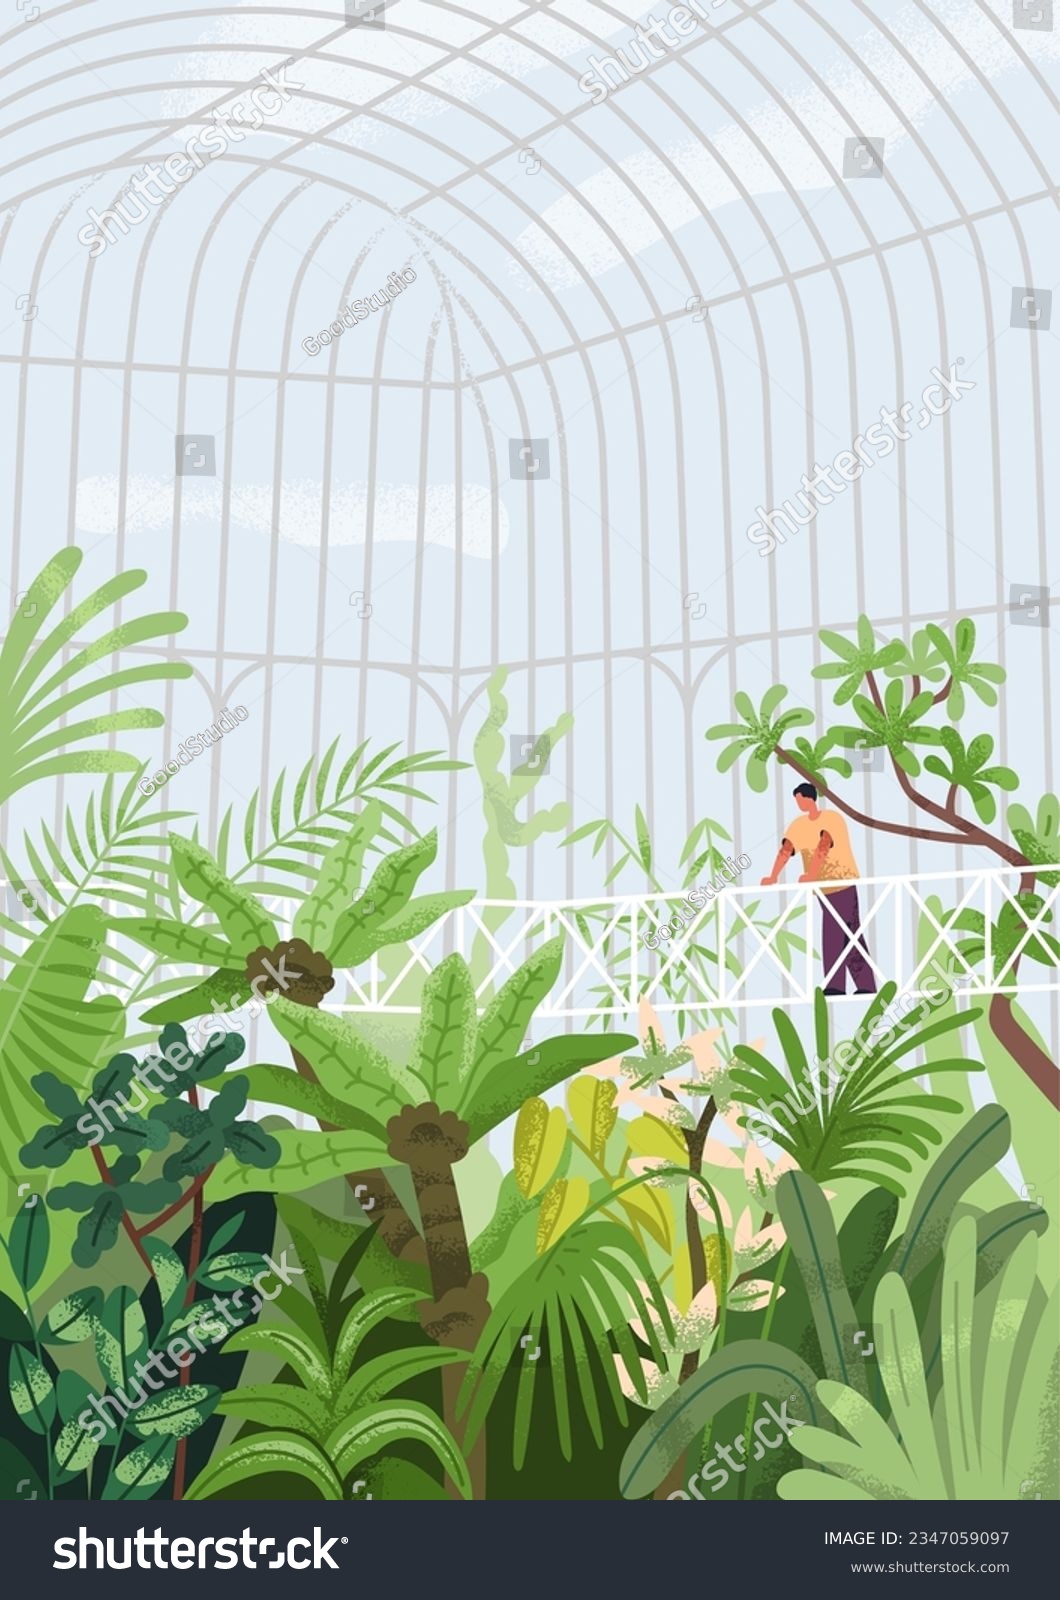 SVG of Greenhouse, conservatory with foliage plant. Botanical garden, park with leaf vegetations. Person enjoying nature in glasshouse, orangery with glass transparent roof. Flat vector illustration svg